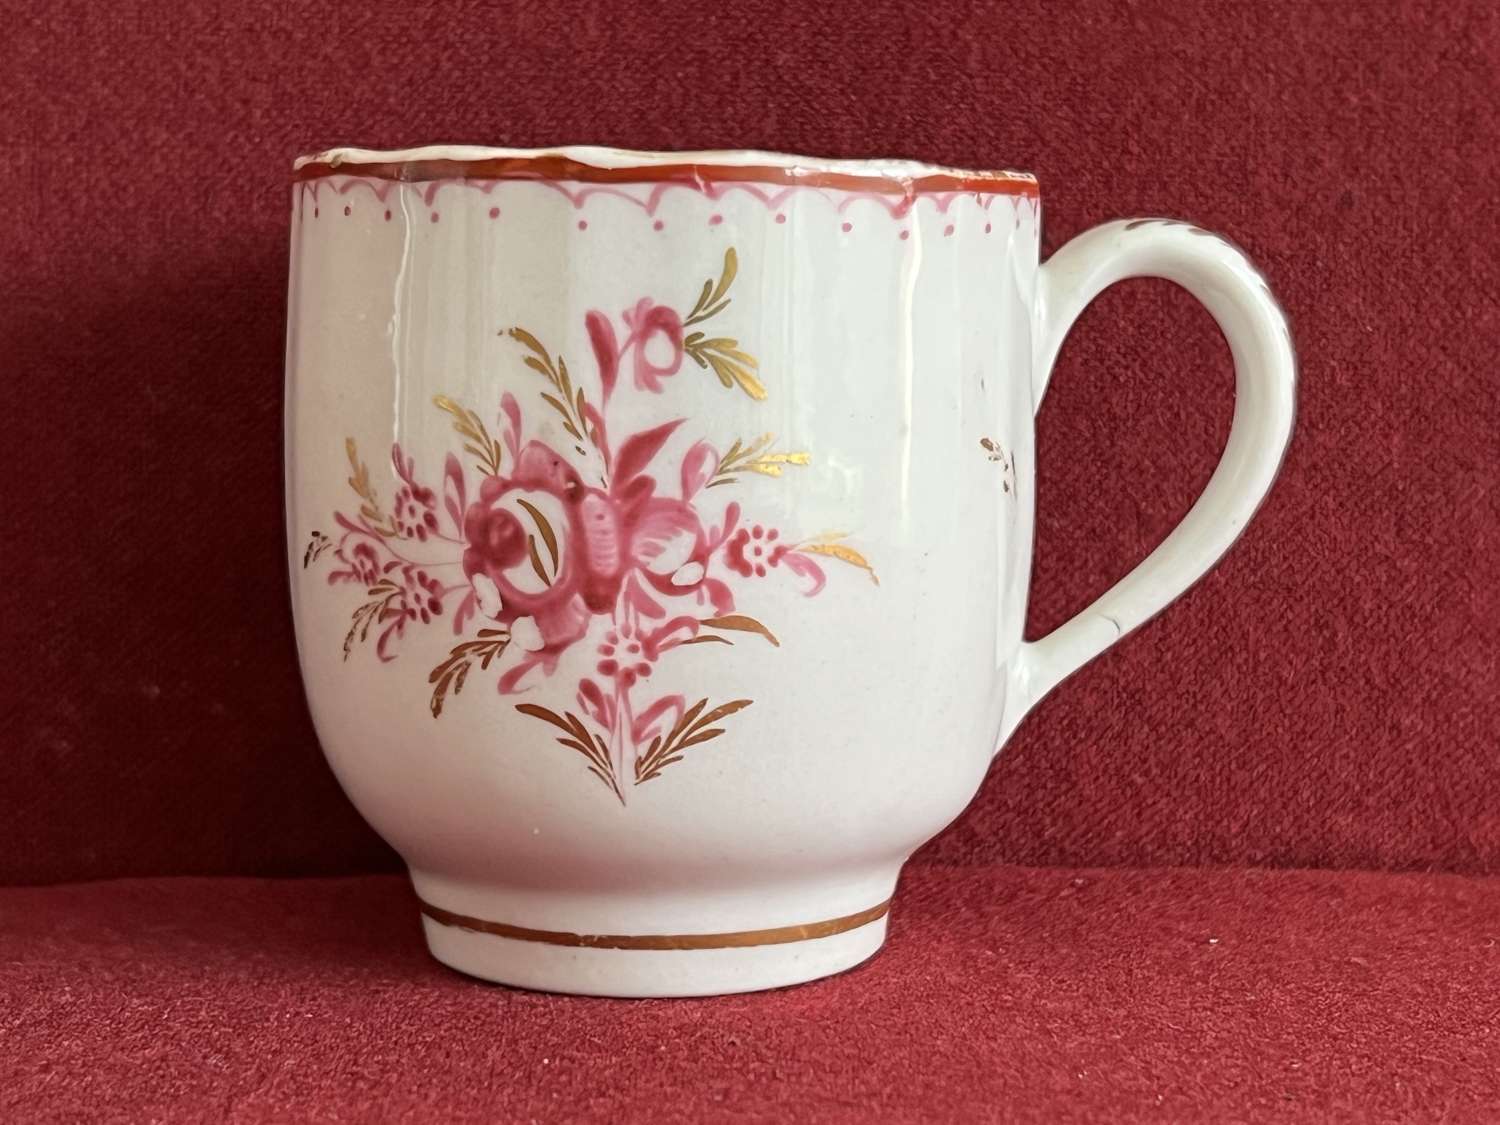 An English Porcelain Coffee Cup c.1790-1800